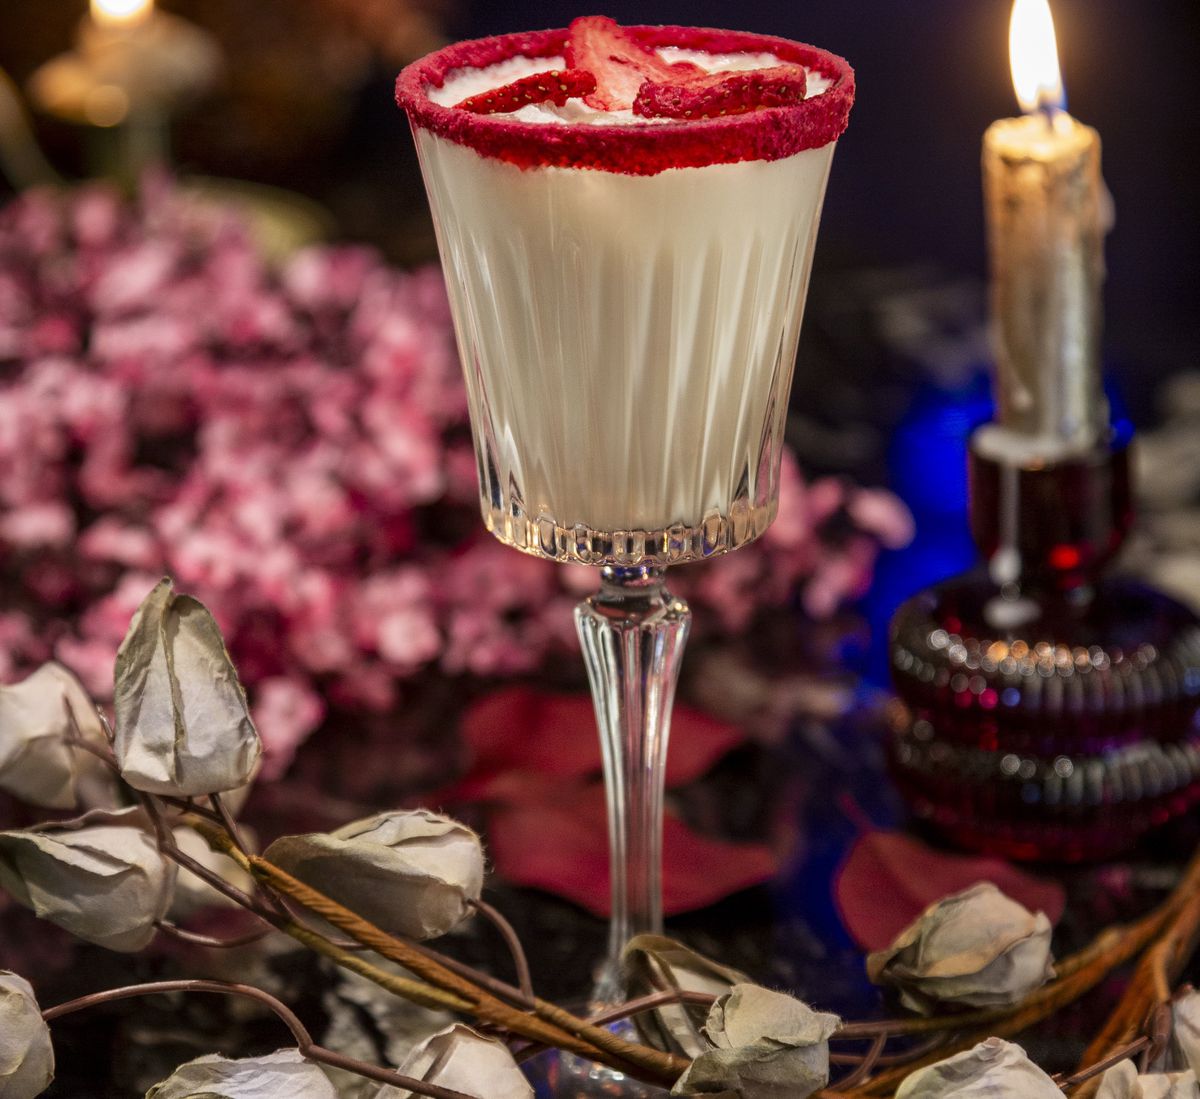 A white cocktail rimmed with red sprinkles, set near roses and candles.